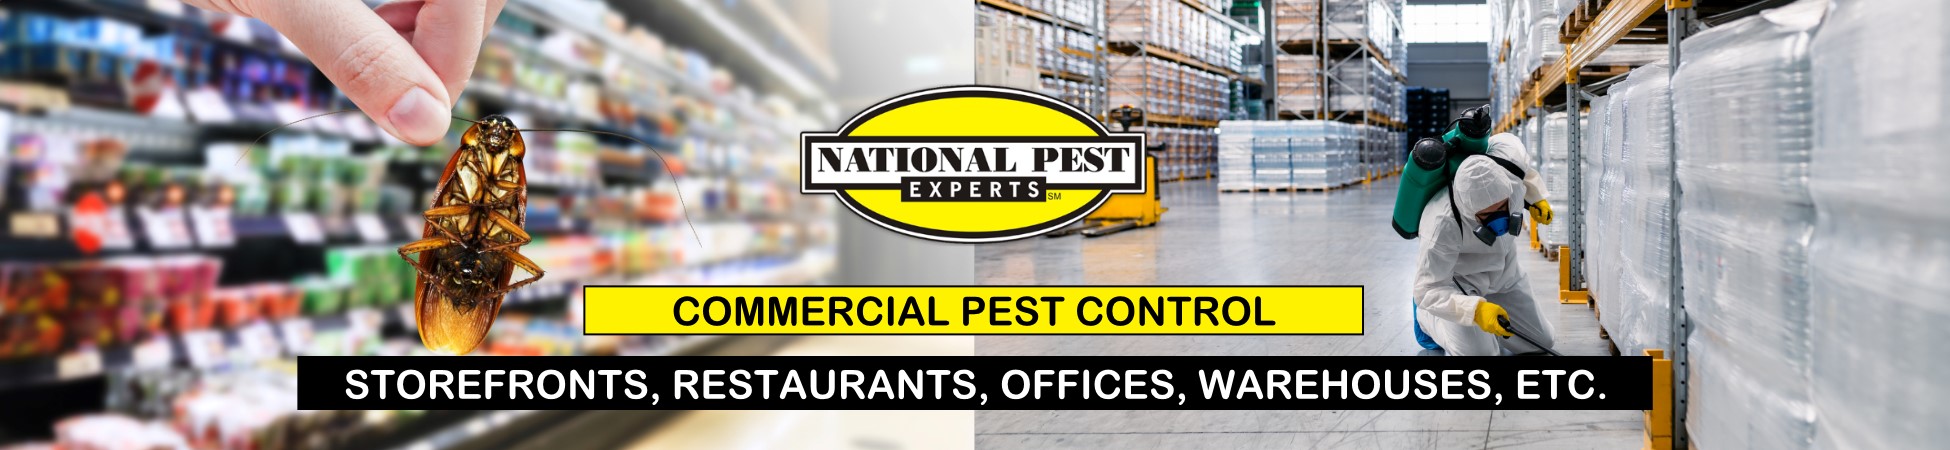 National Pest Experts - Commercial & Industrial exterminating and pest control in Massapequa Park, NY